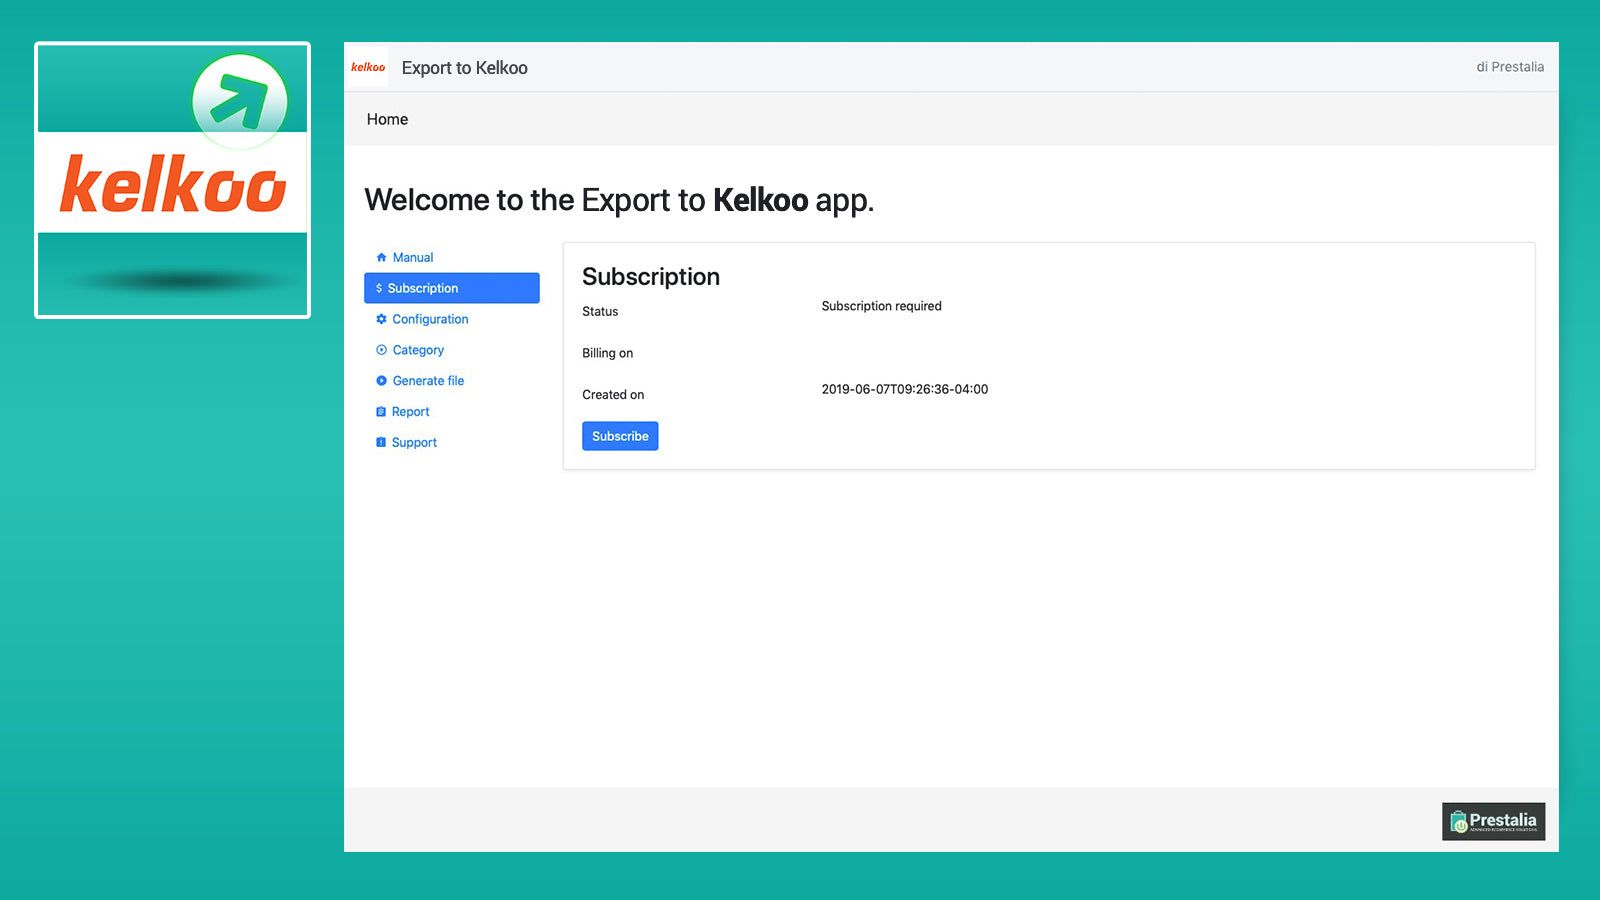 Easily subscribe to the export service.